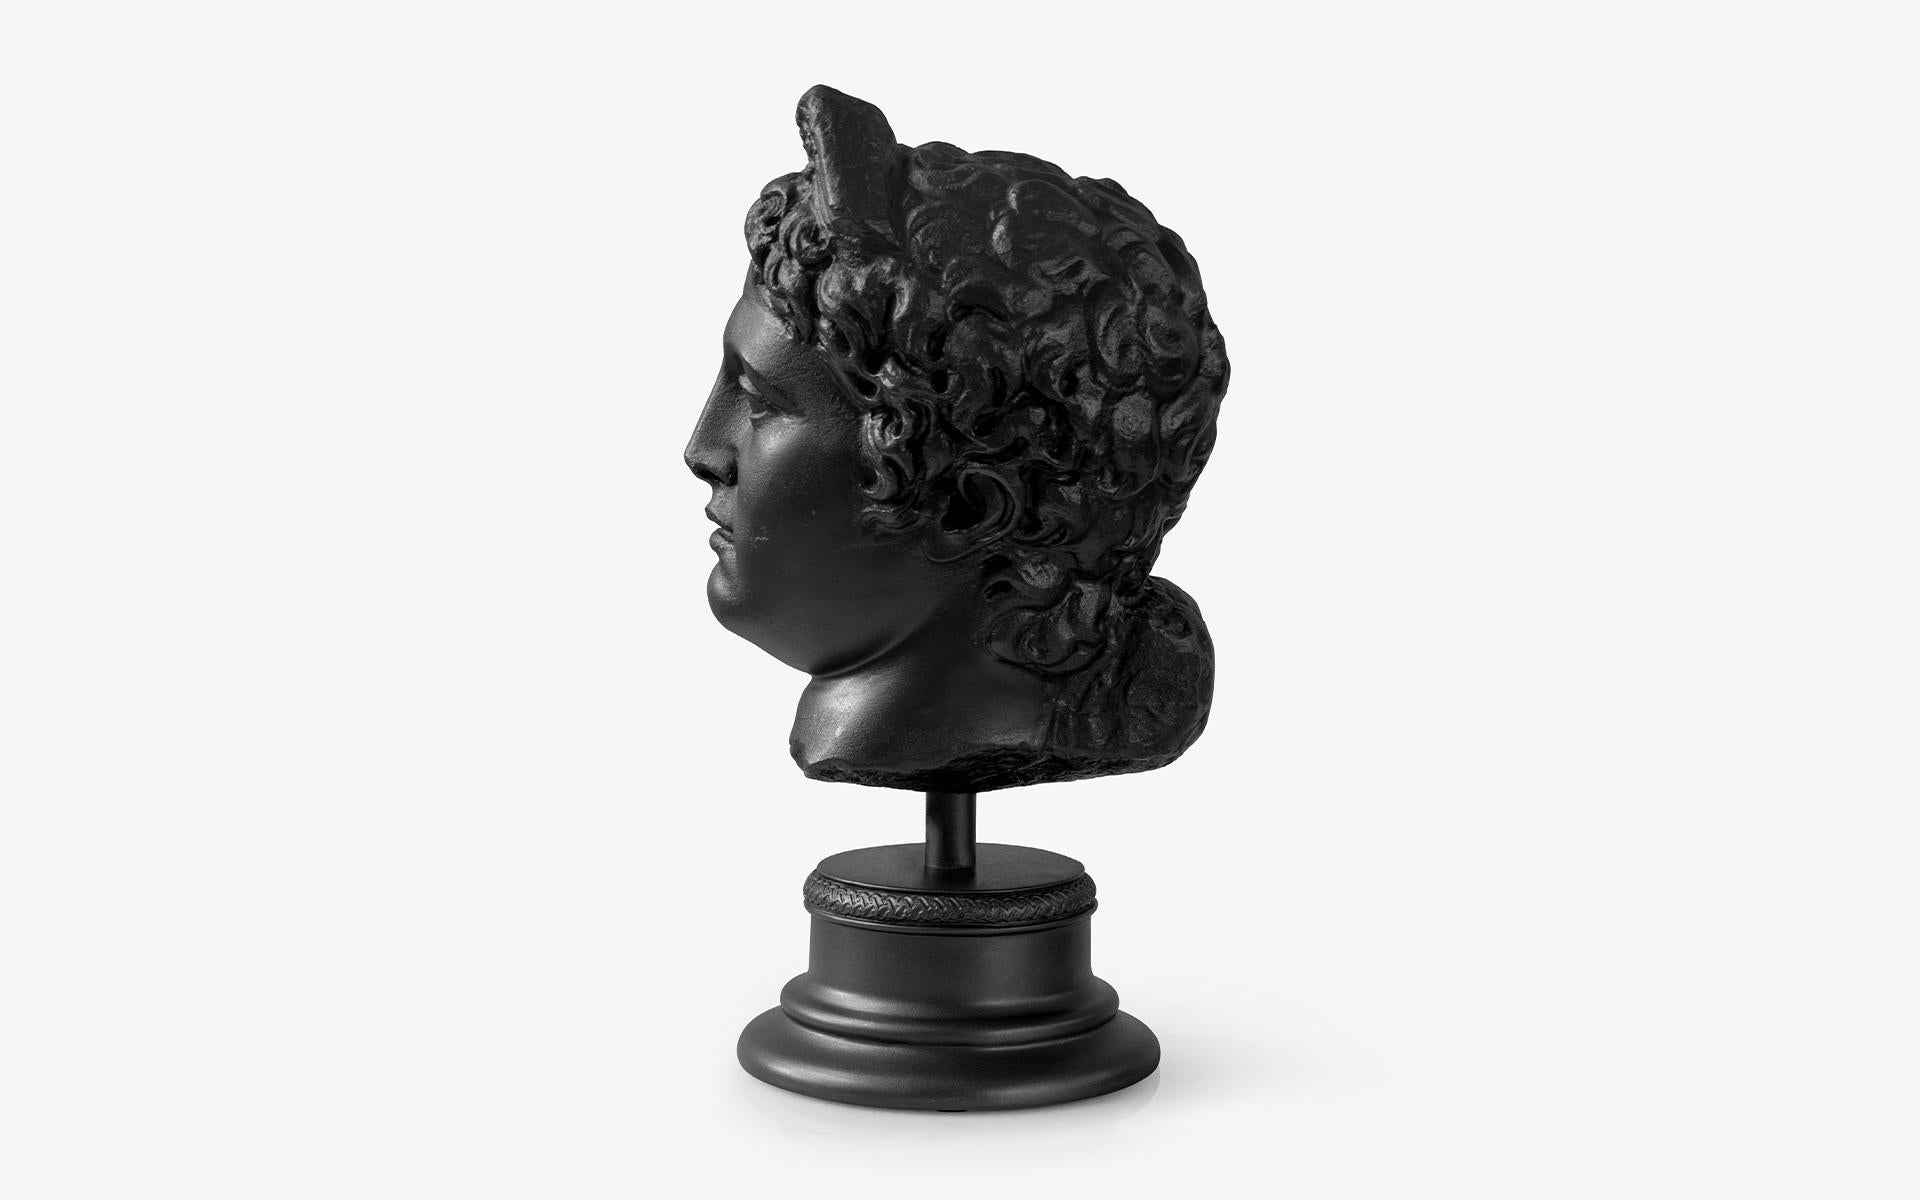 Classical Greek Black Mercurius Hermes Bust Statue Made with Compressed Marble Powder